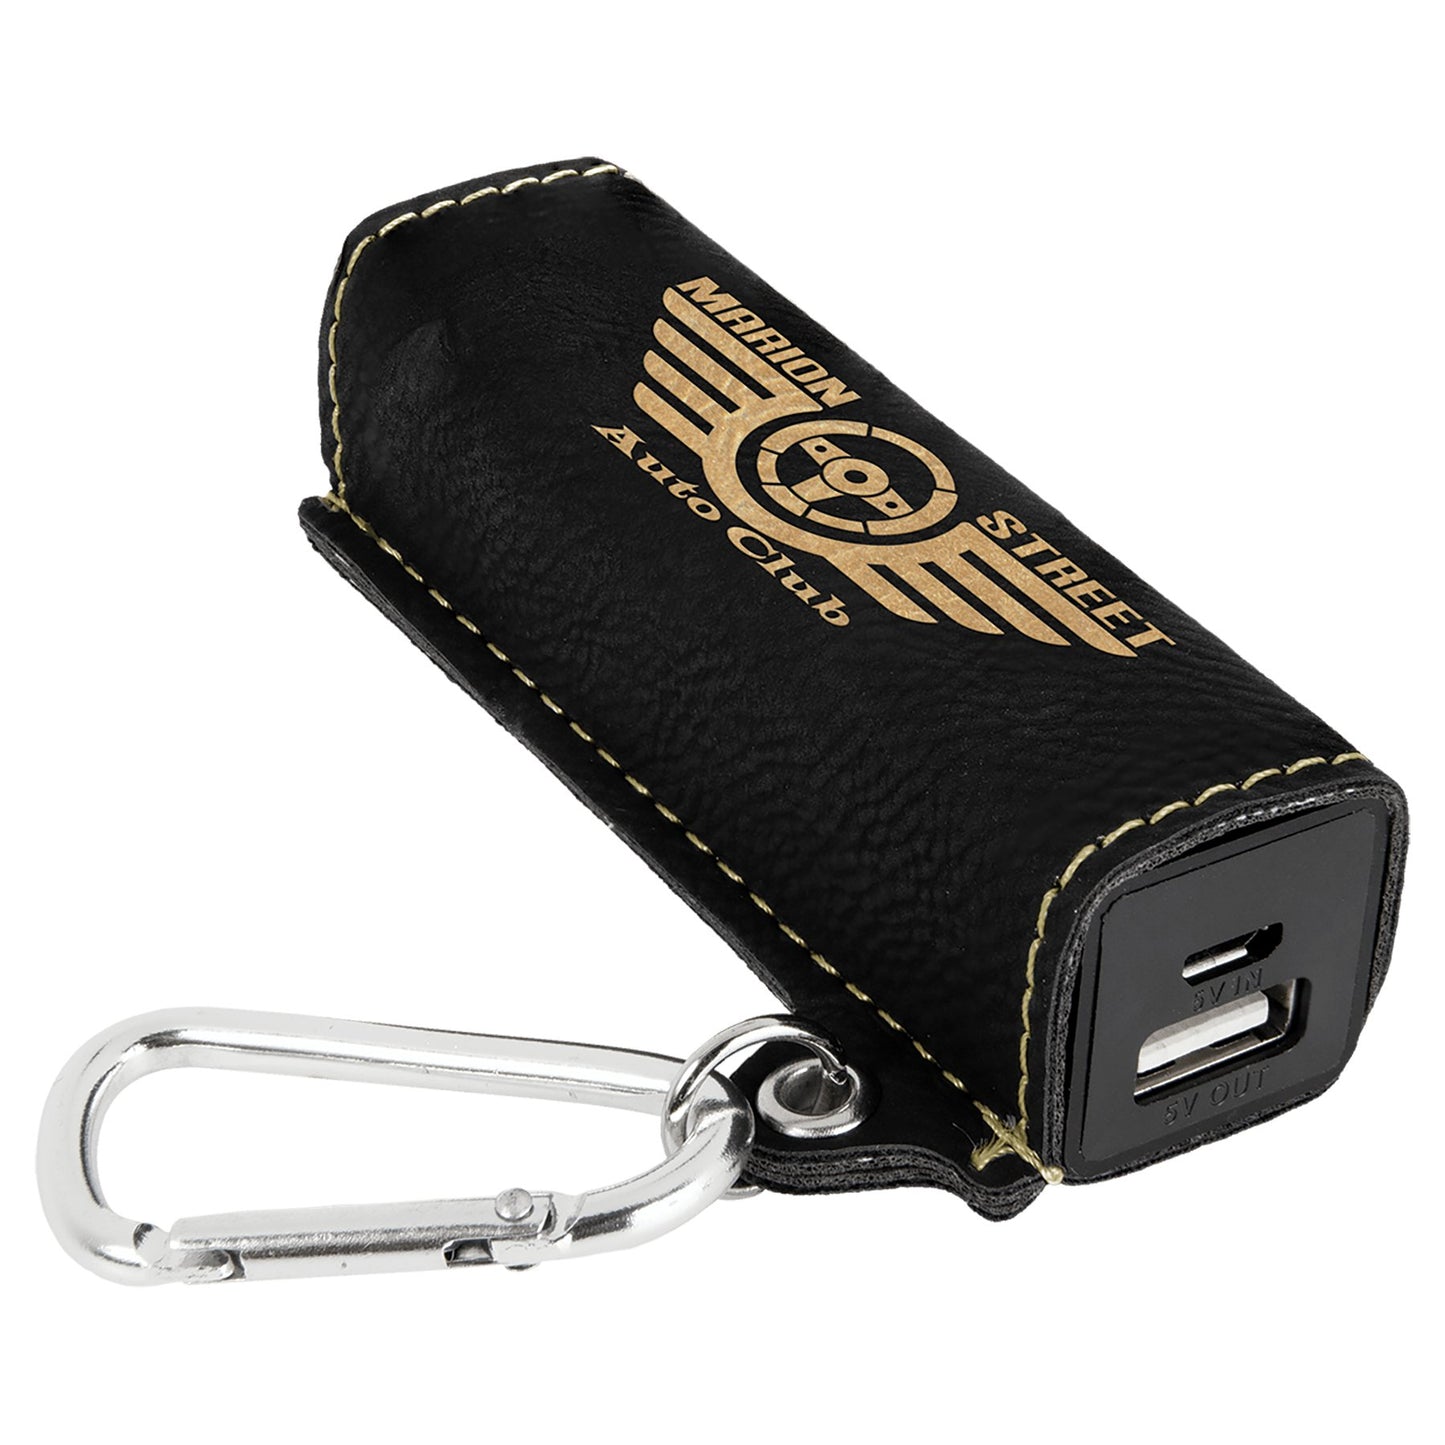 Laserable Leatherette 2200 mAh Power Bank with USB Cord - Legacy Creator IncBlack/Gold